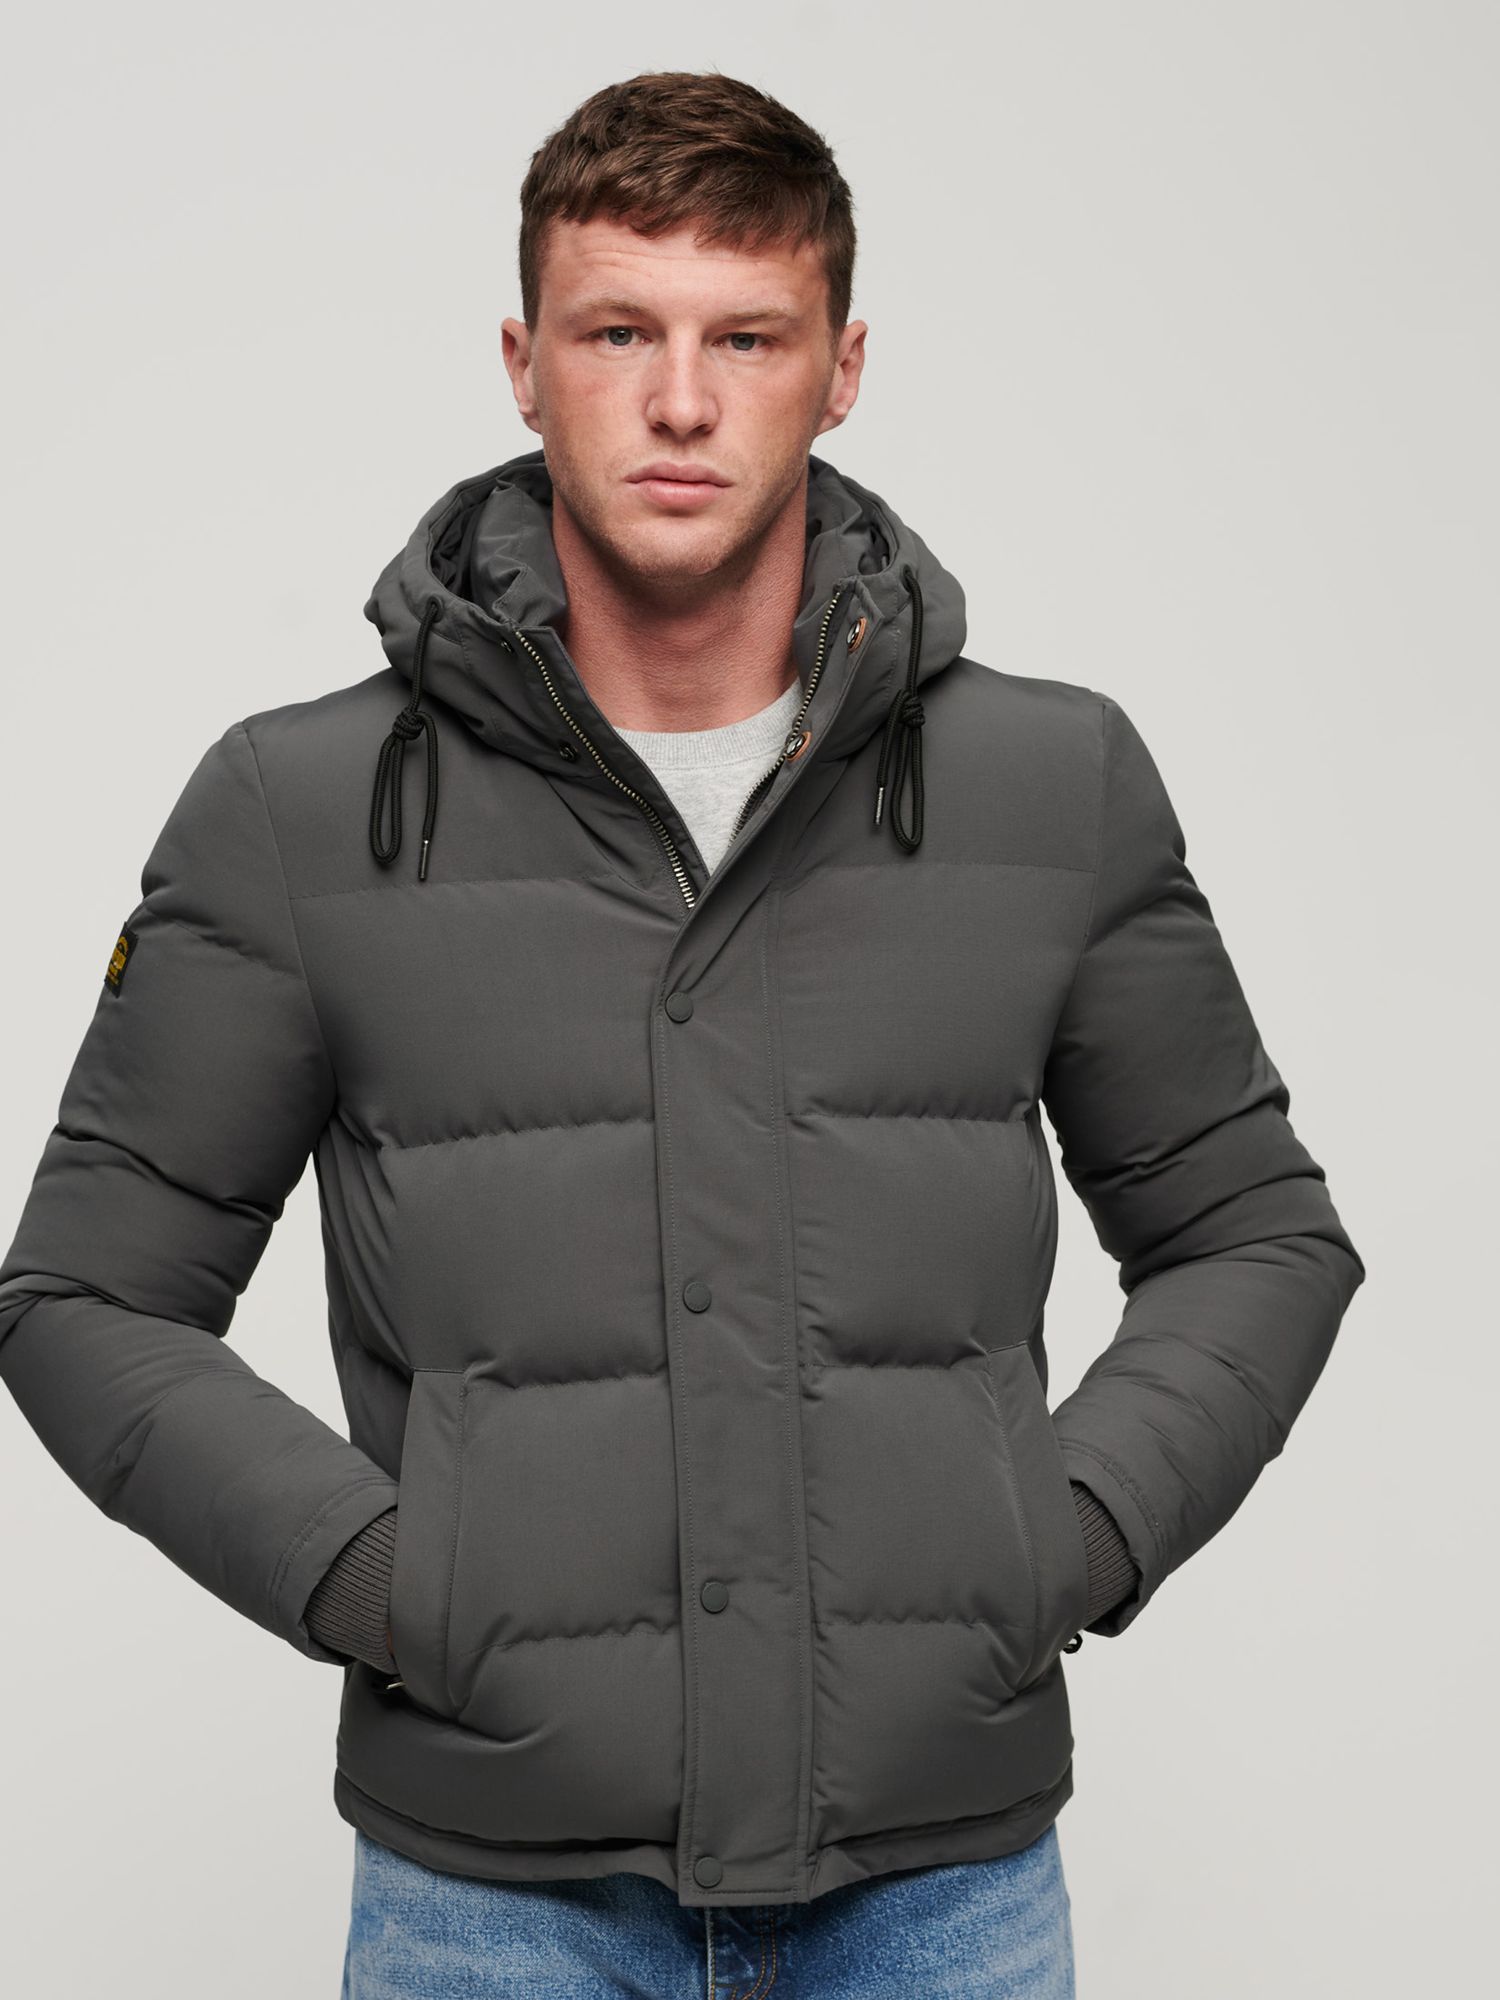 Superdry Everest Hooded Puffer Jacket, Charcoal at John Lewis & Partners